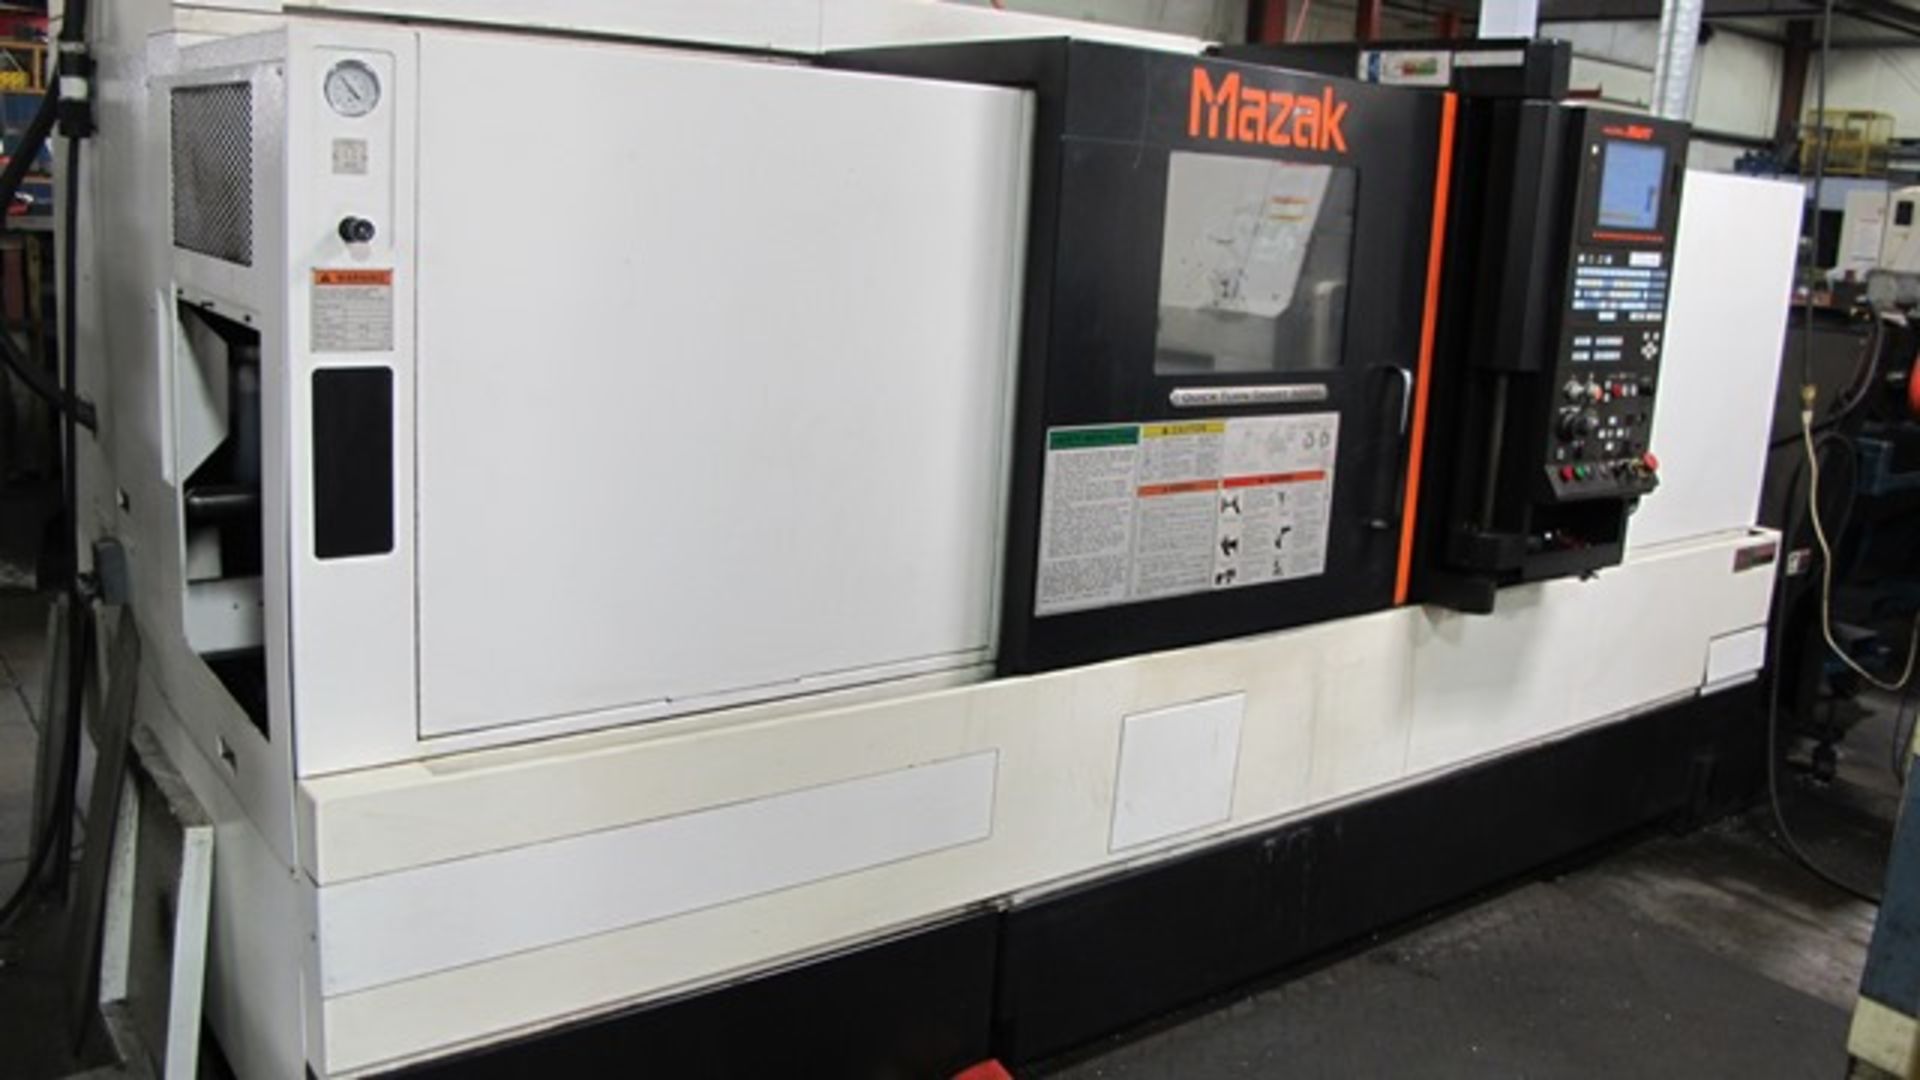 2011 MAZAK QUICK TURN 300M-II CNC TURNING CENTER WITH 10" CHUCK, 6 LIVE TOOLS, TAIL STOCK, S/ - Image 2 of 6